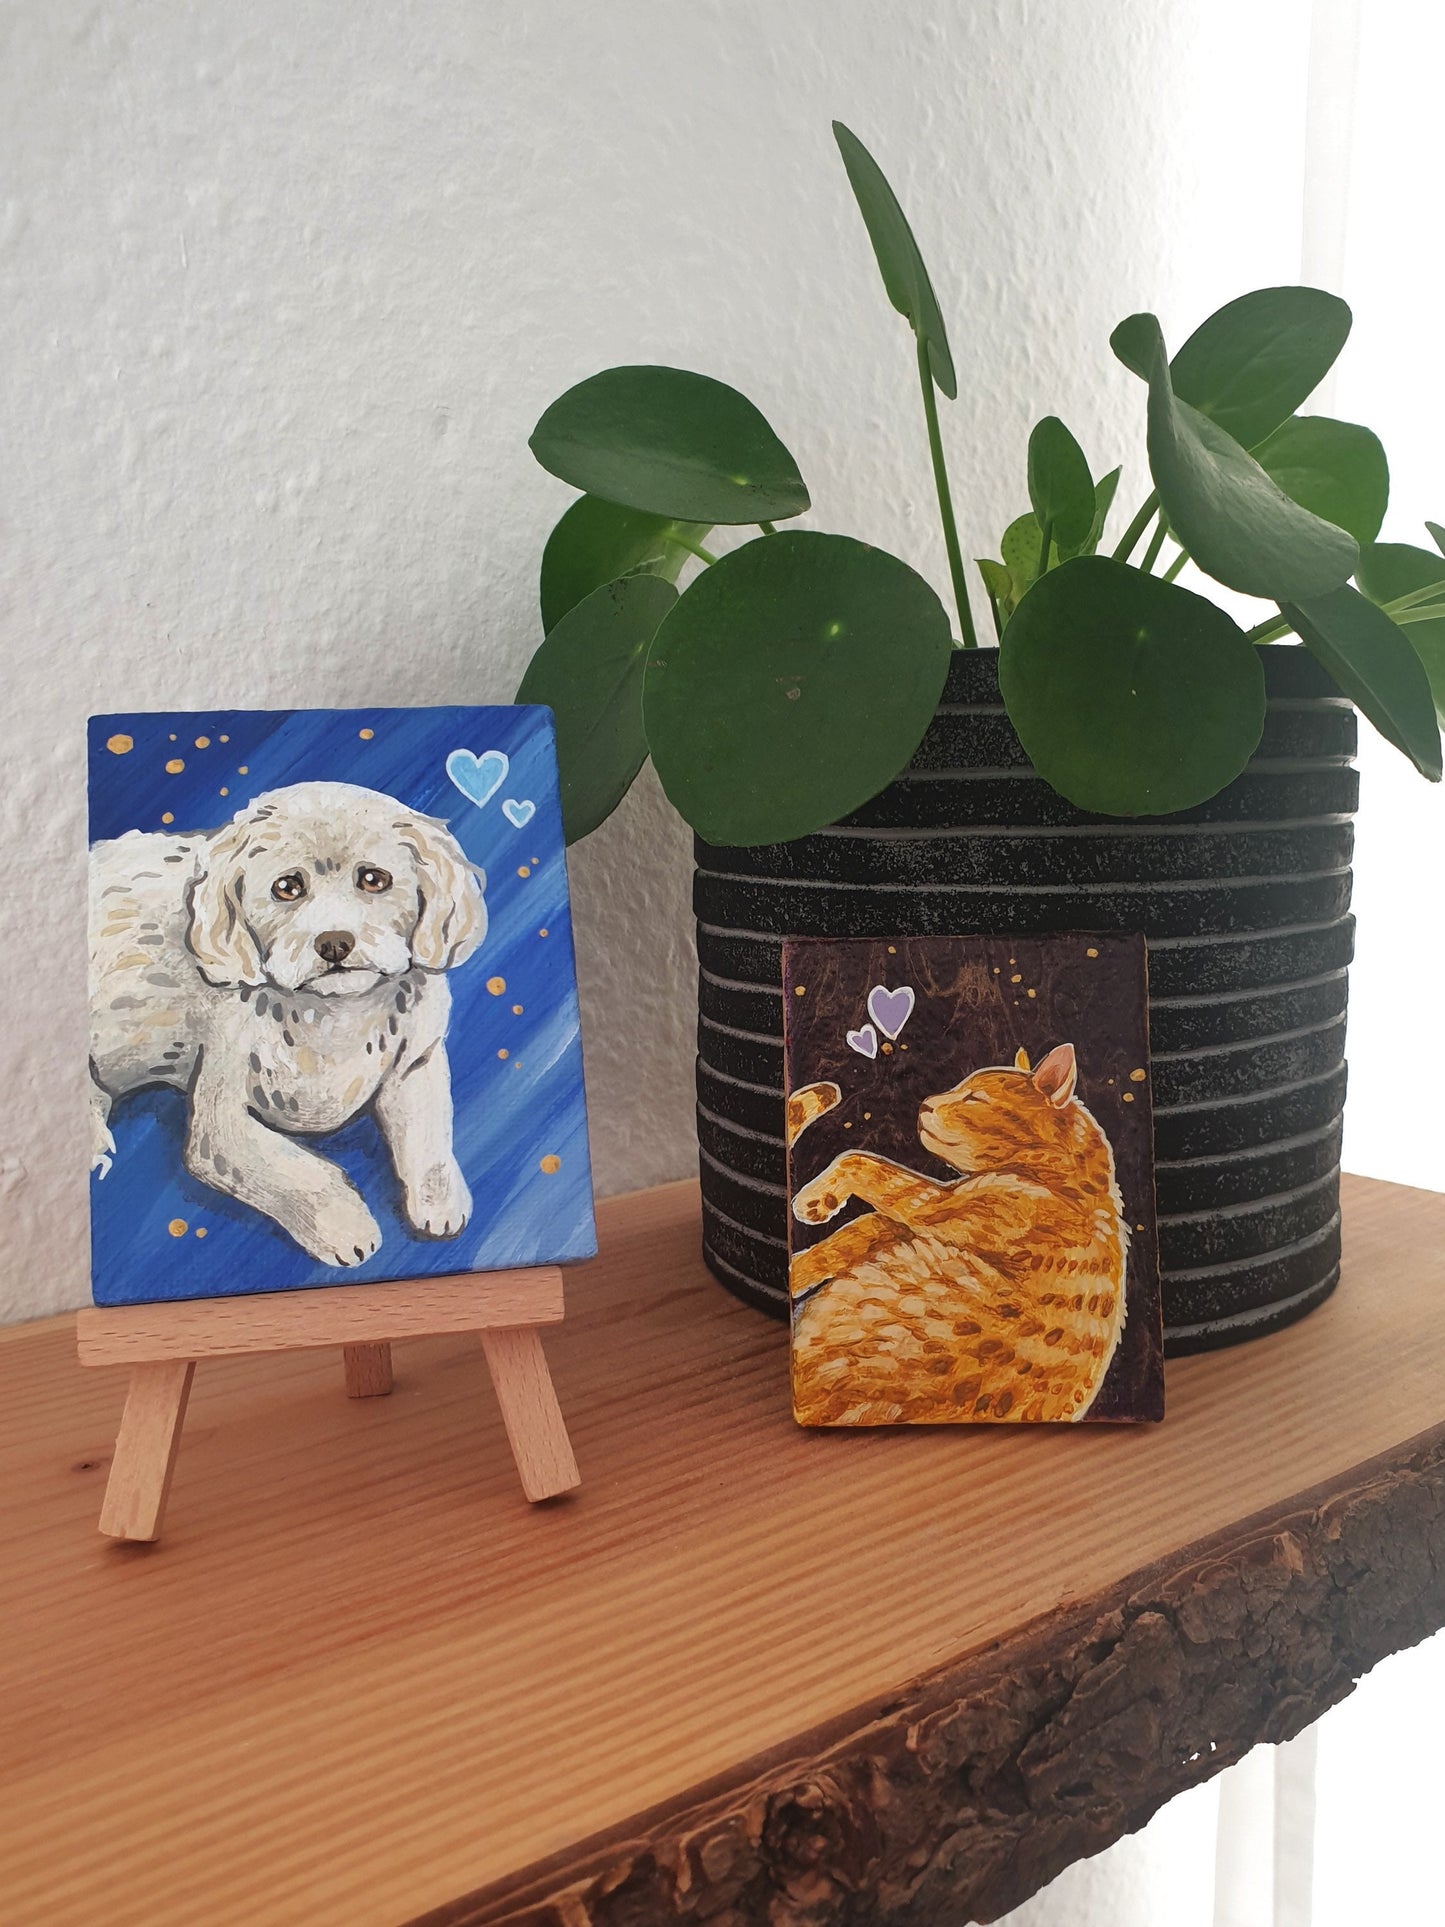 Personalized pet portrait, tiny canvas portrait, pet owner gift, small gift, small present, small acrylic painting, personalized painting